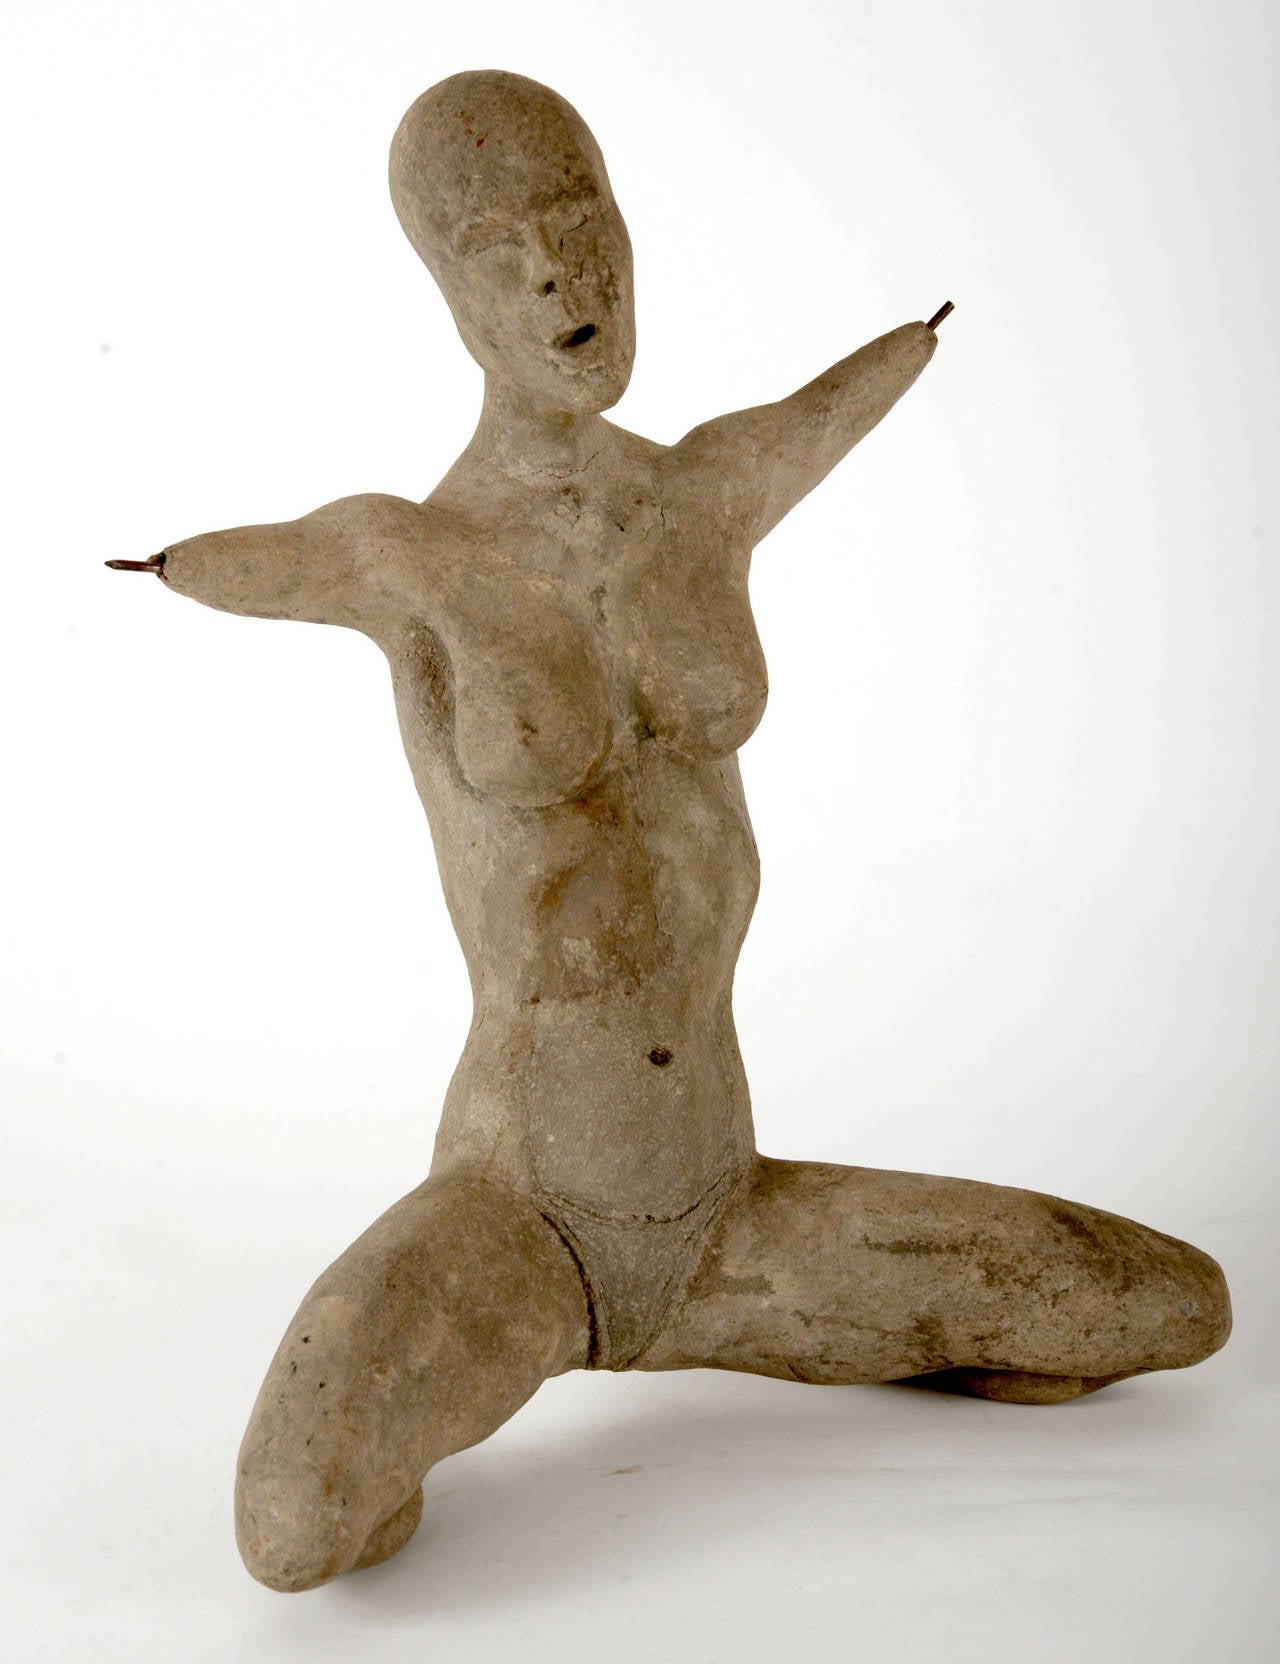 Unusual female form in an exaggerated kneeling position. Her hands and feet are represented by the protruding steel armature.